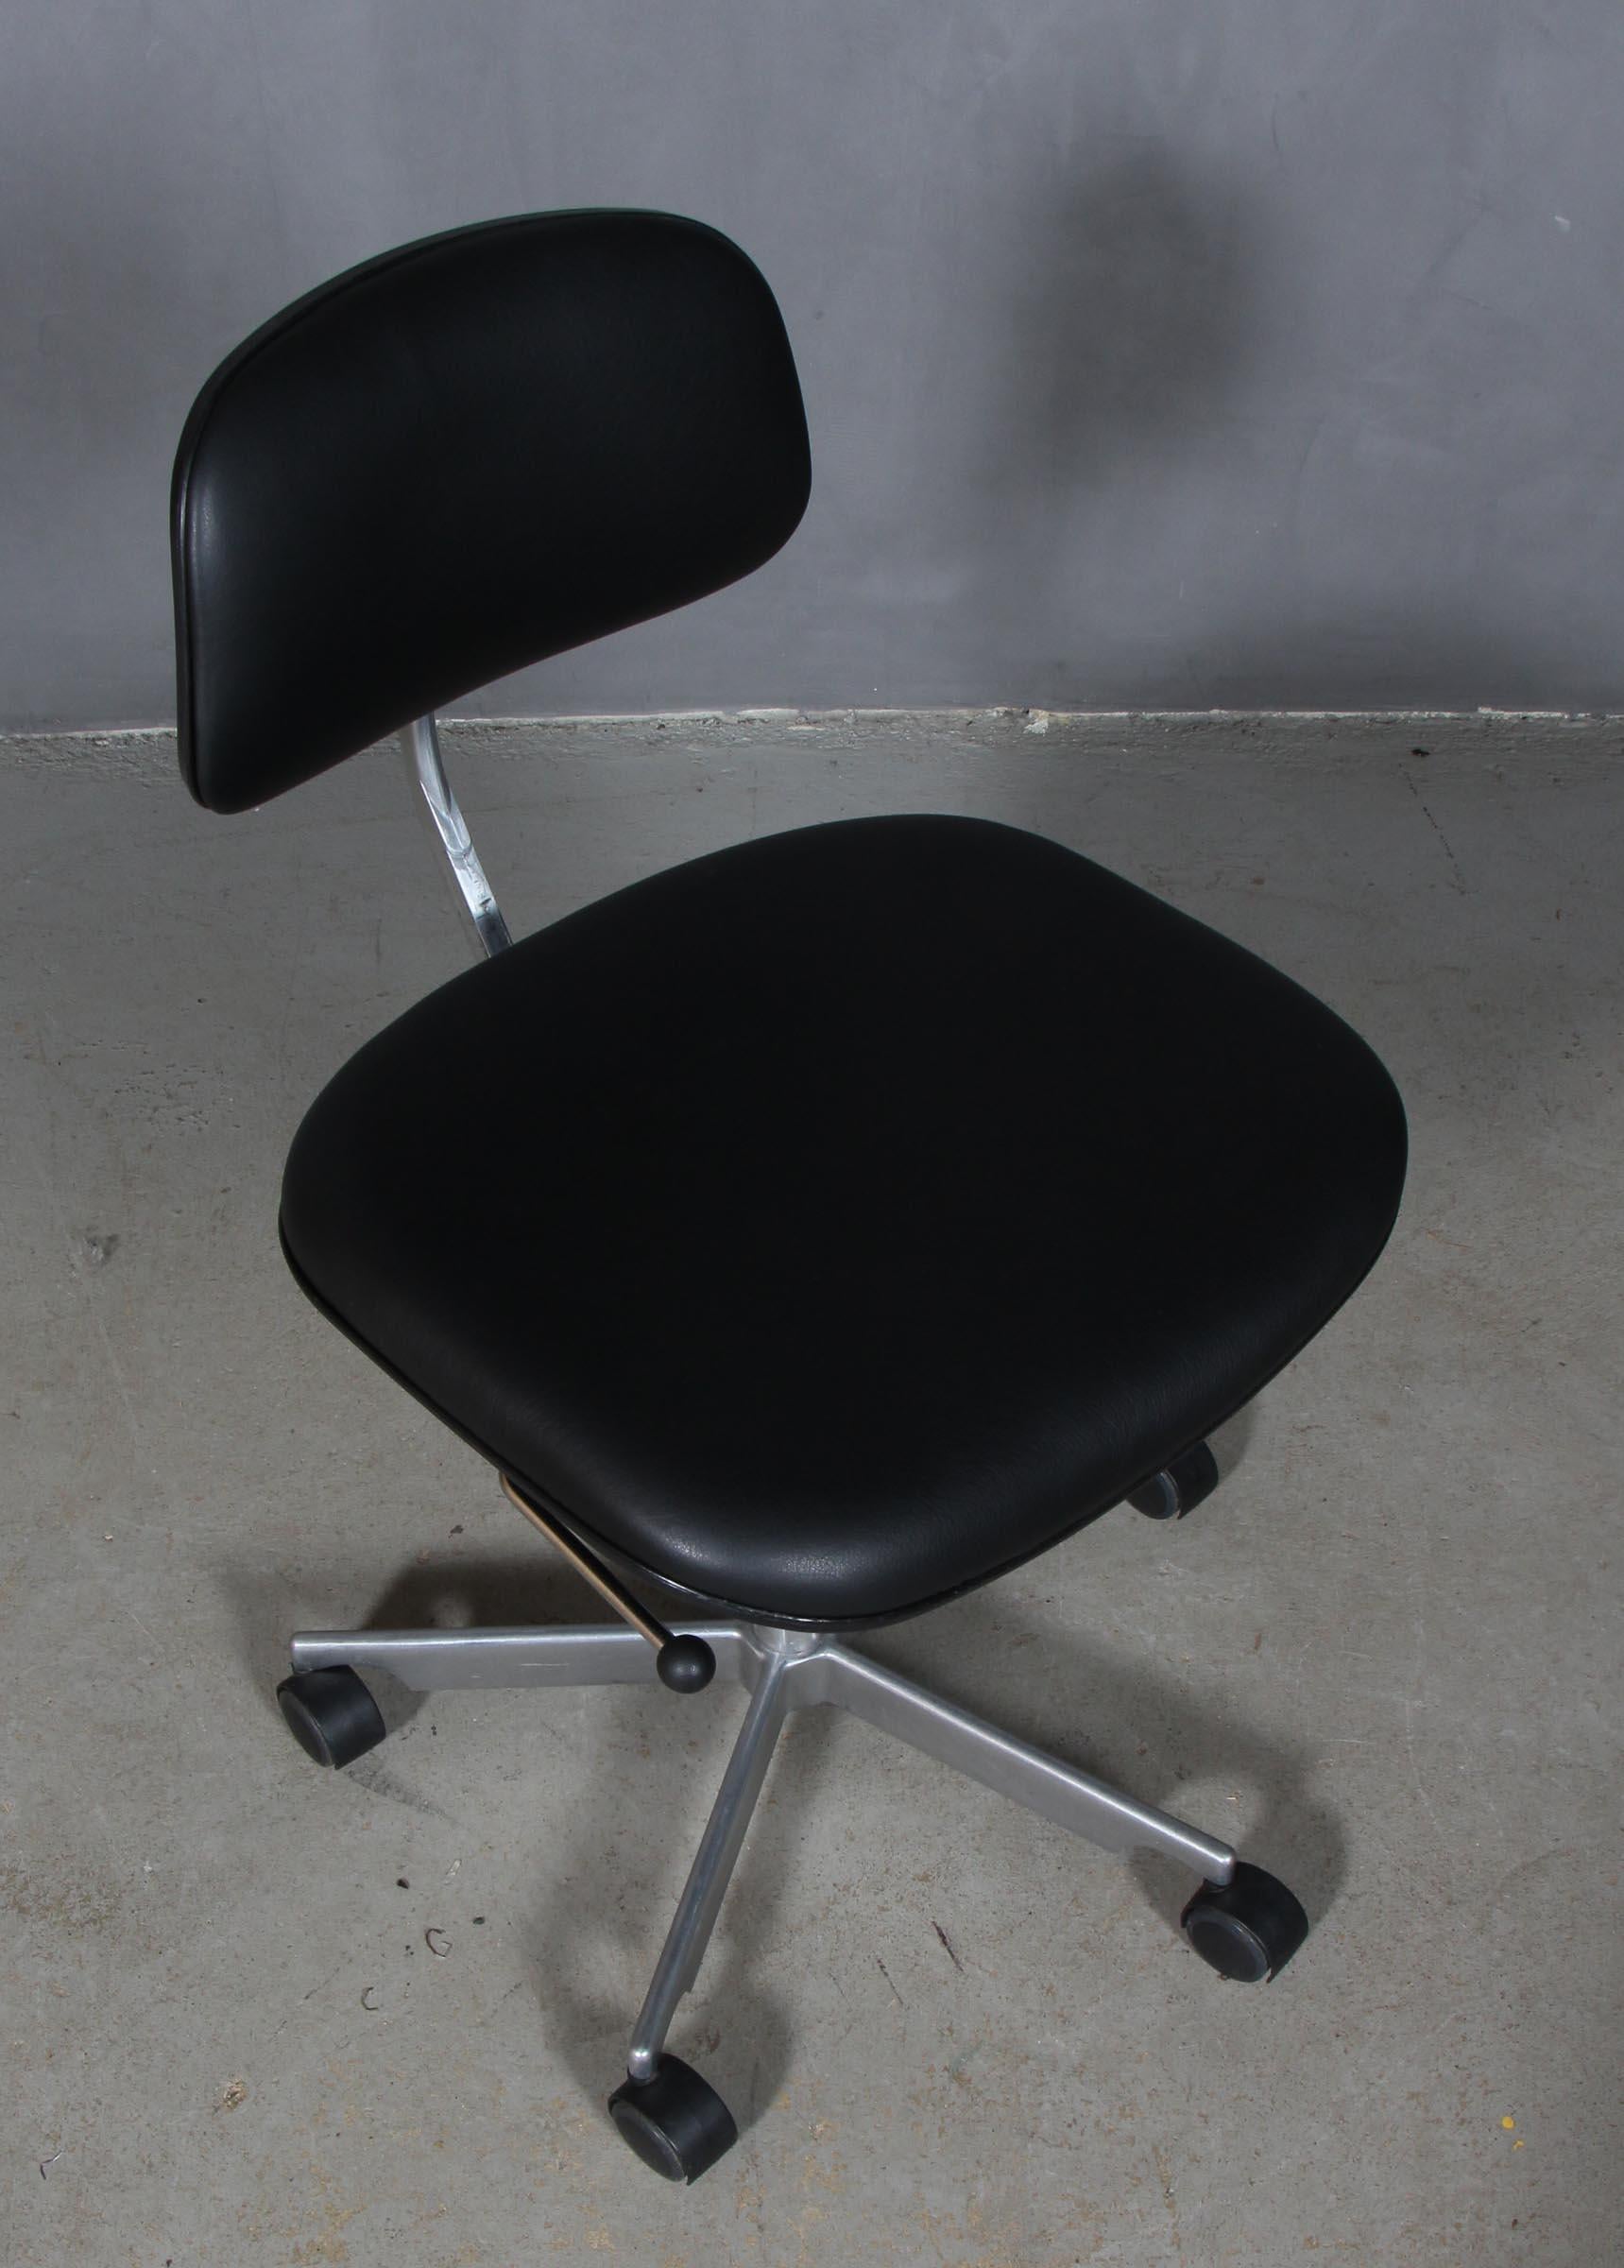 Kevi office chair designed by Jørgen Rasmussen. With height, tilt and other adjustments. 

New upholstered with black aniline leather.